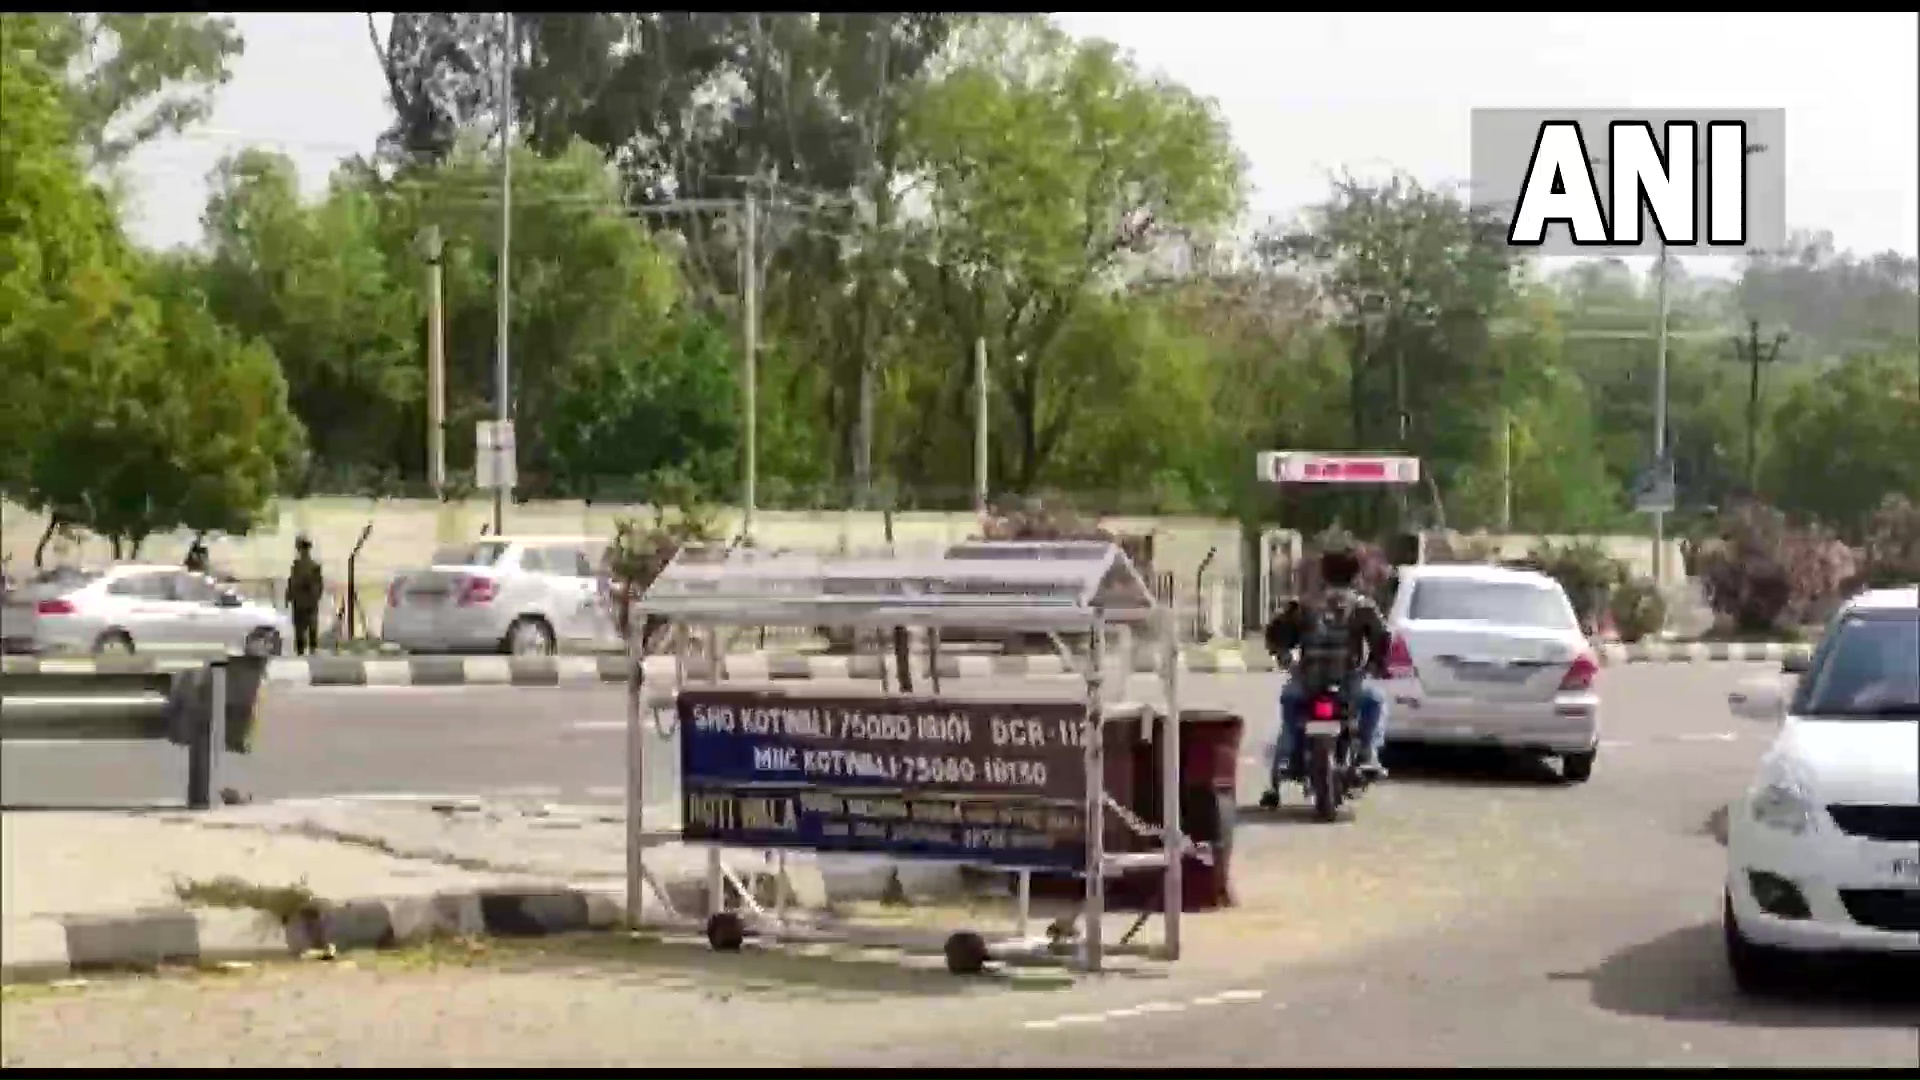 Punjab: 4 dead in firing at Bathinda Military Station; fratricidal incident, say police